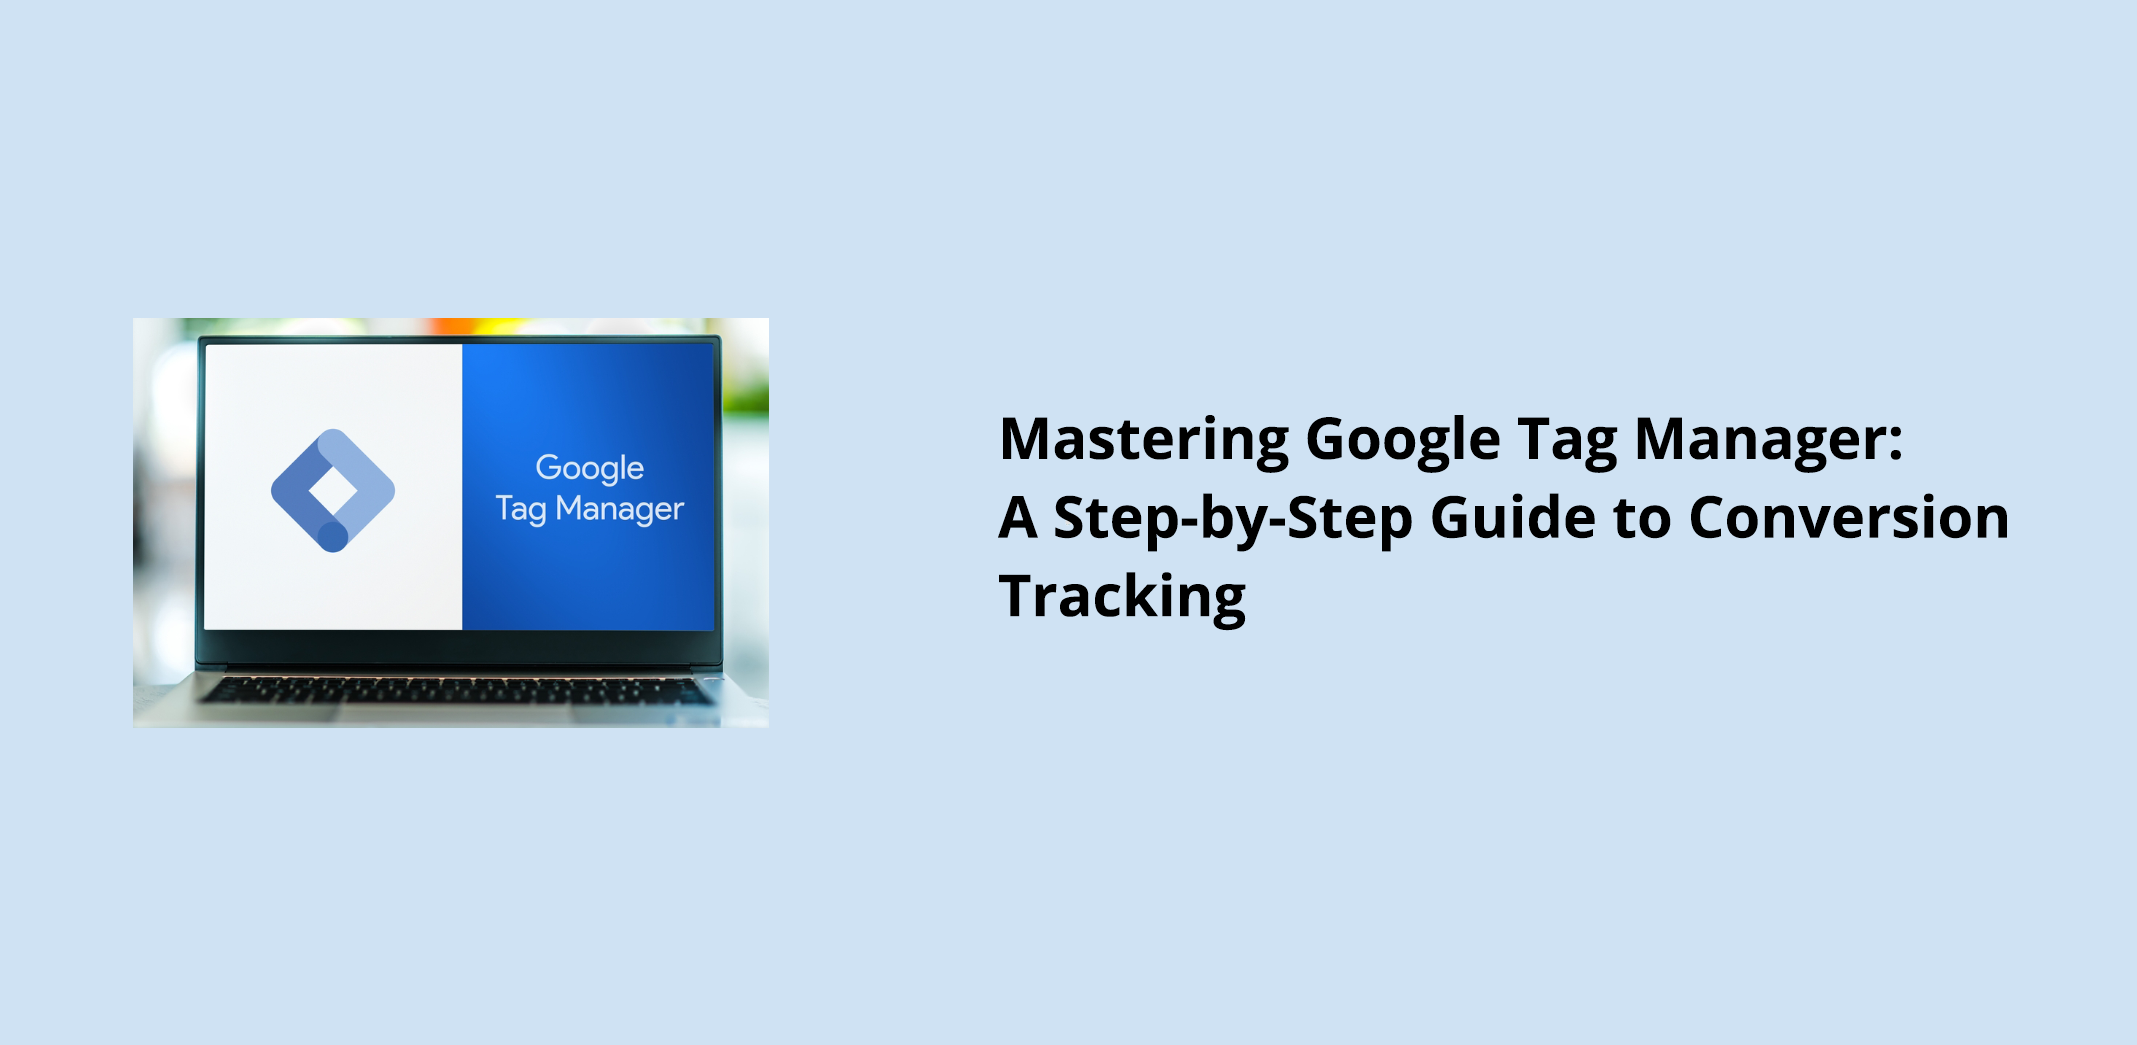 Mastering Google Tag Manager: A Step-by-Step Guide to Conversion Tracking